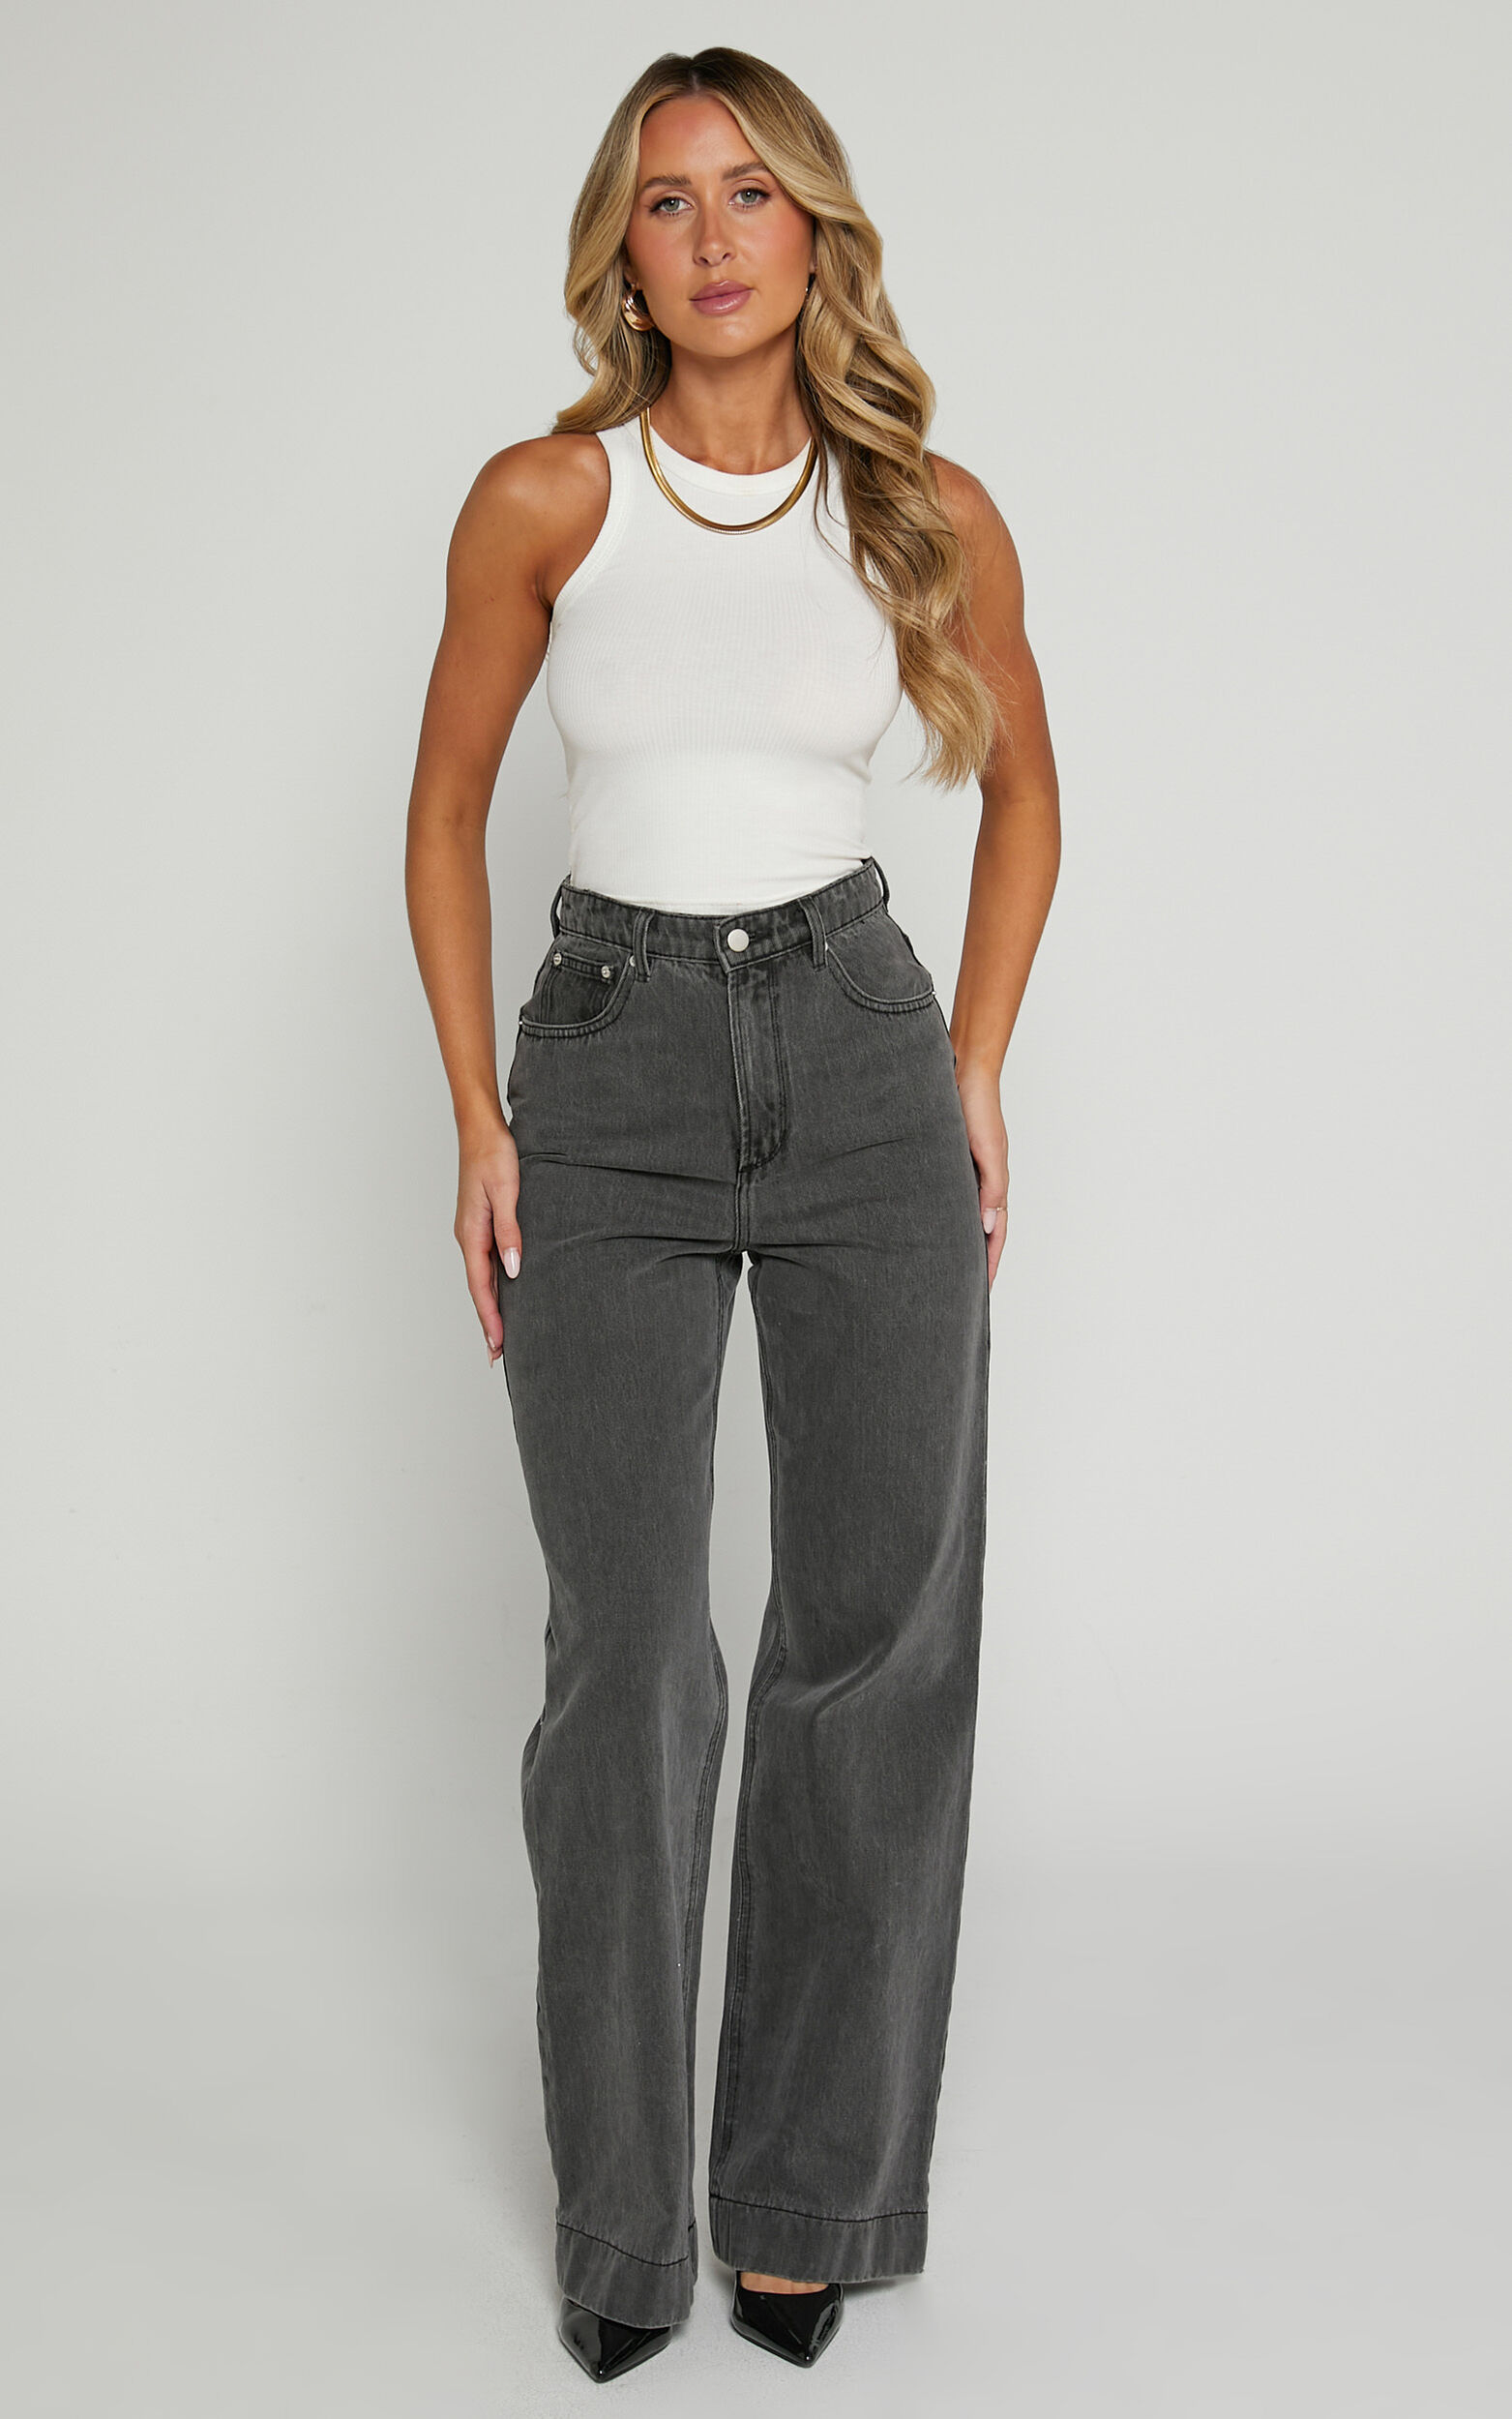 https://images.showpo.com/dw/image/v2/BDPQ_PRD/on/demandware.static/-/Sites-sp-master-catalog/default/dw442dd47f/images/emman-straight-leg-jeans/Emman_Jeans_-_High_Waisted_Recycled_Cotton_Wide_Leg_Jeans_in_Washed_Black_3.jpg?sw=1563&sh=2500